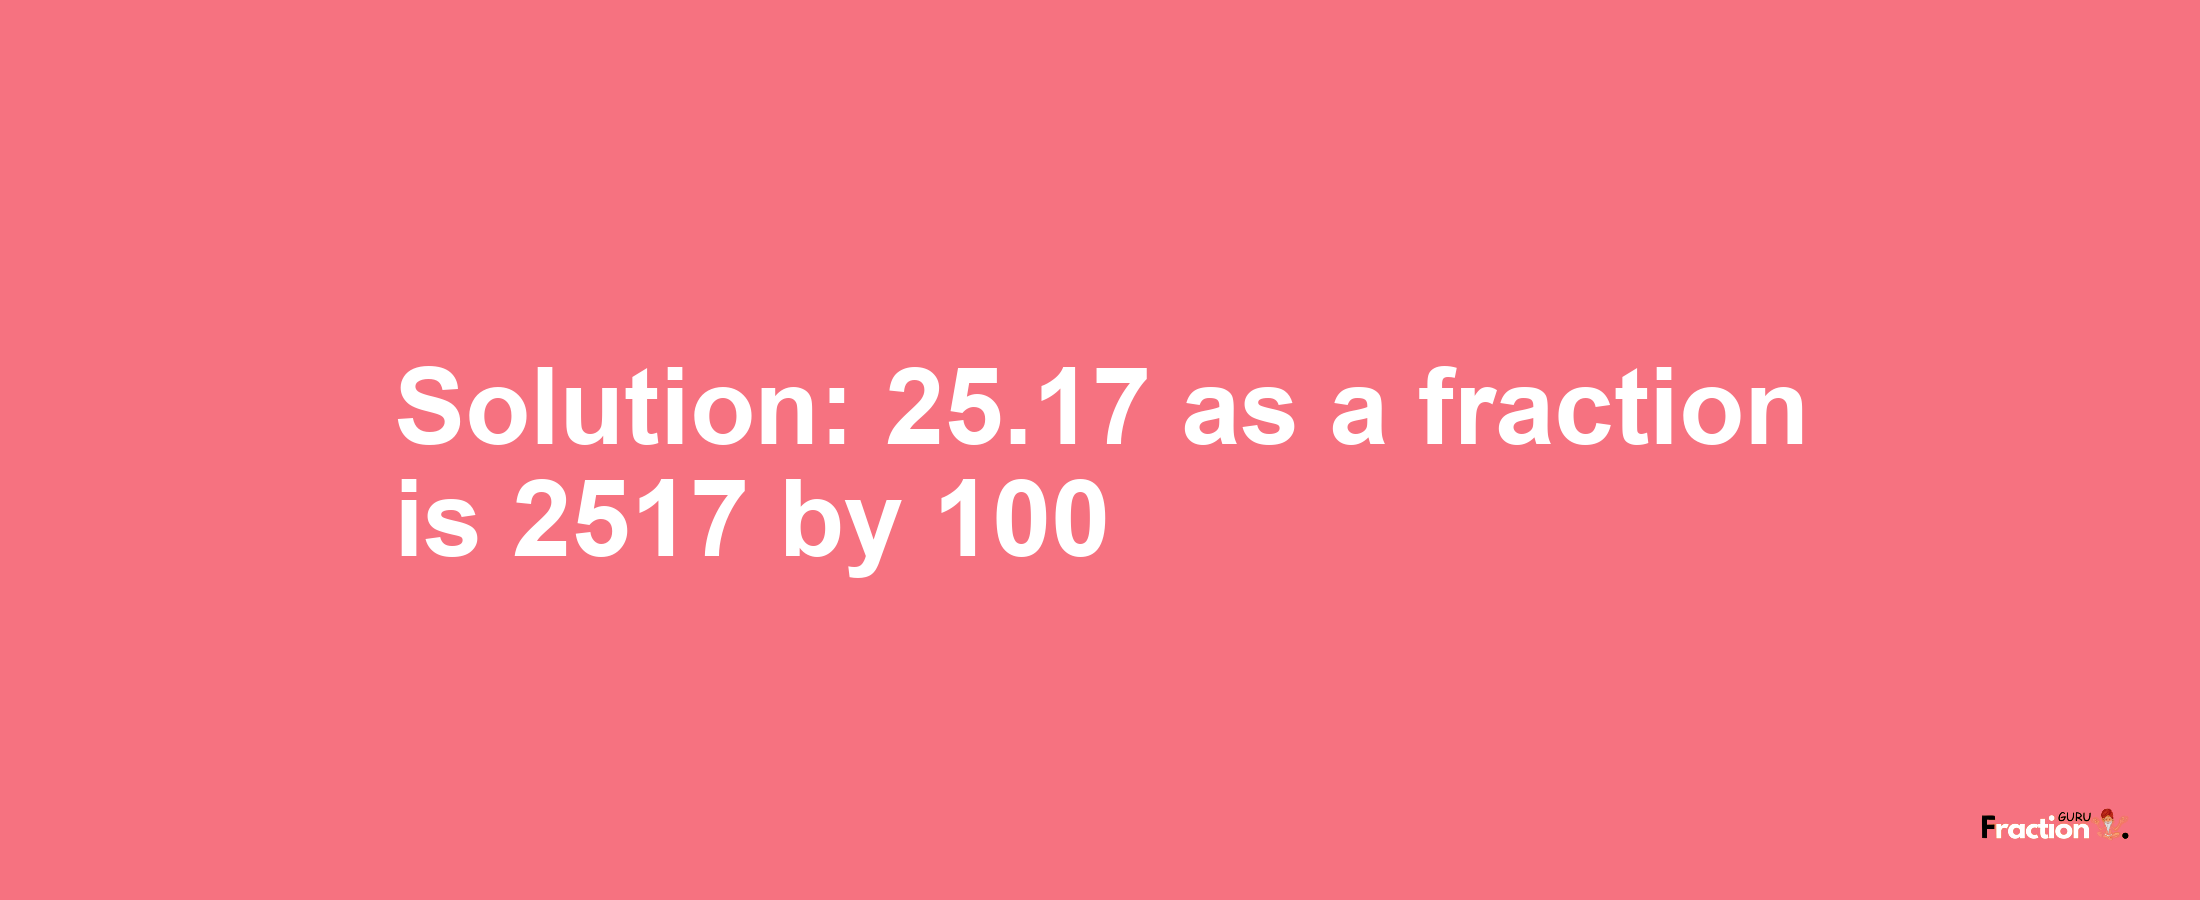 Solution:25.17 as a fraction is 2517/100